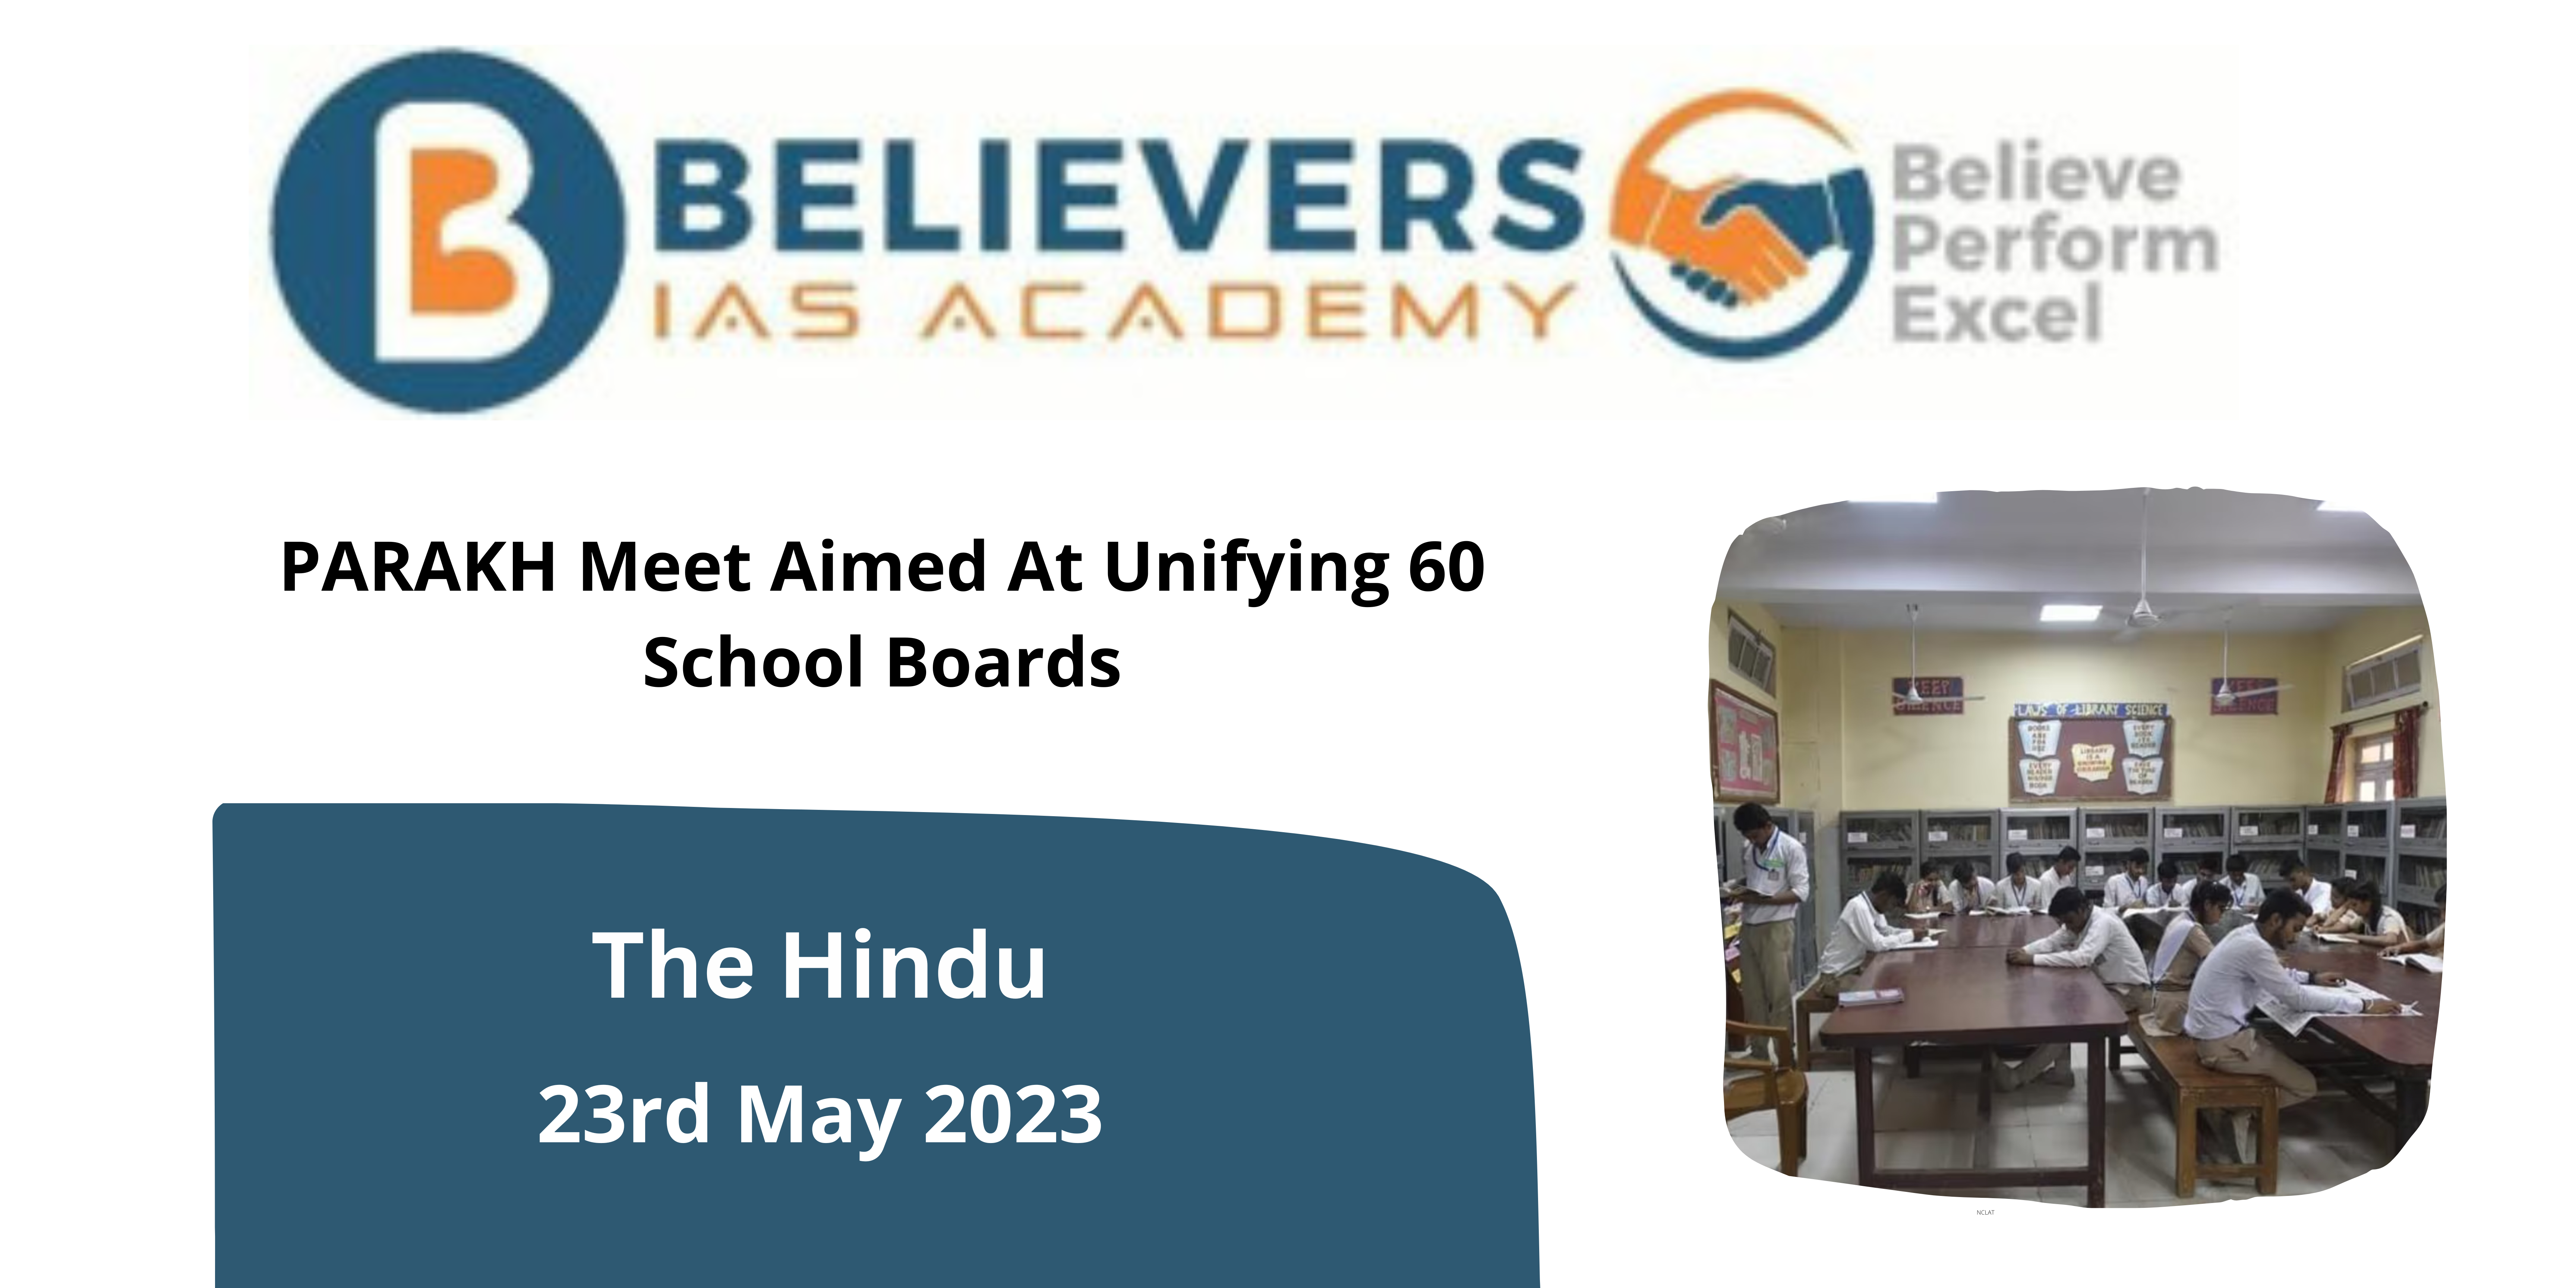 PARAKH Meet Aimed At Unifying 60 School Boards